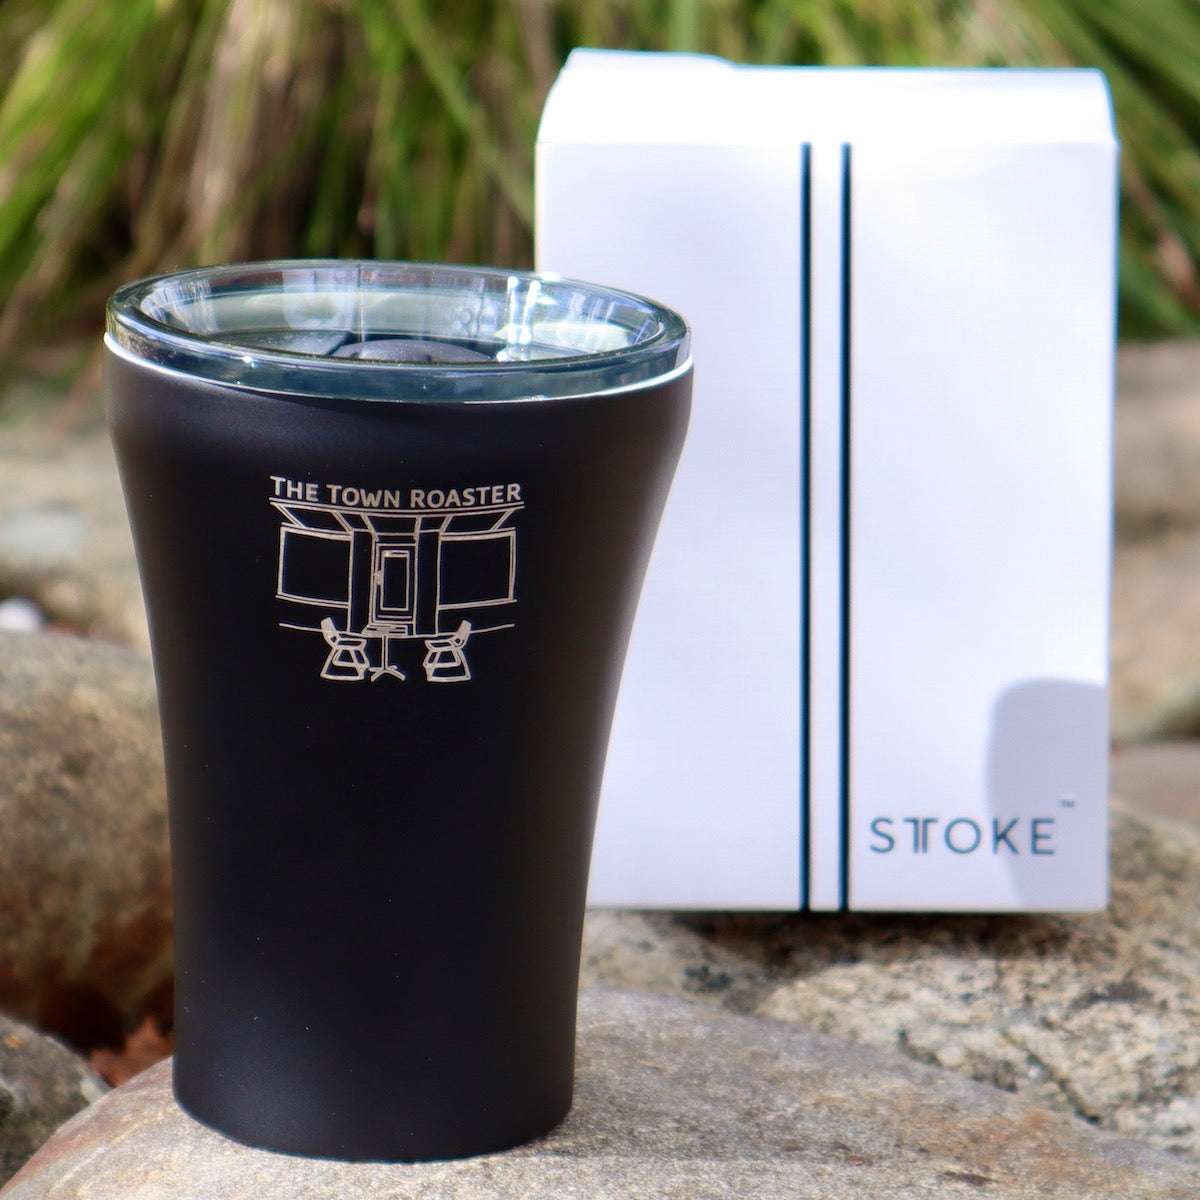 Sttoke 8oz Reusable Cup Coffee cup from The Town Roaster